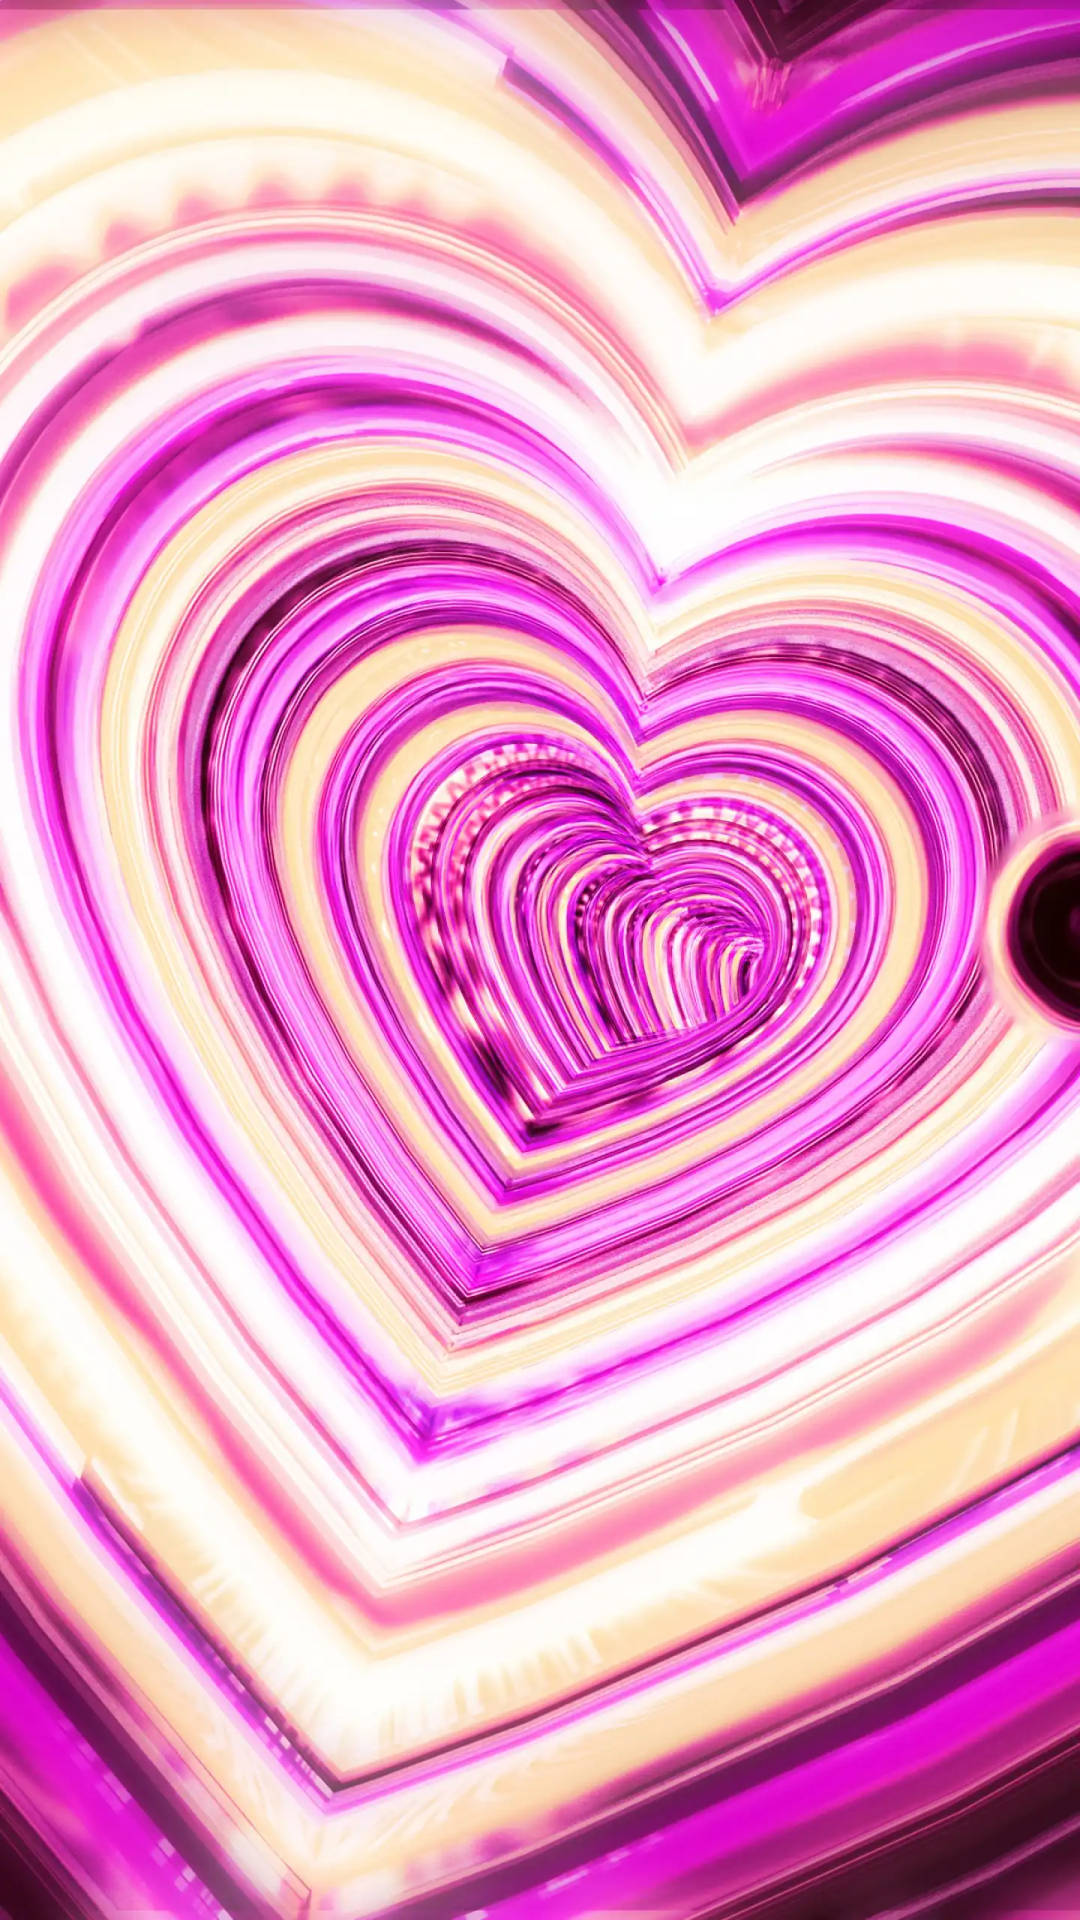 Pink 3D iPhone Concentric Hearts Wallpaper